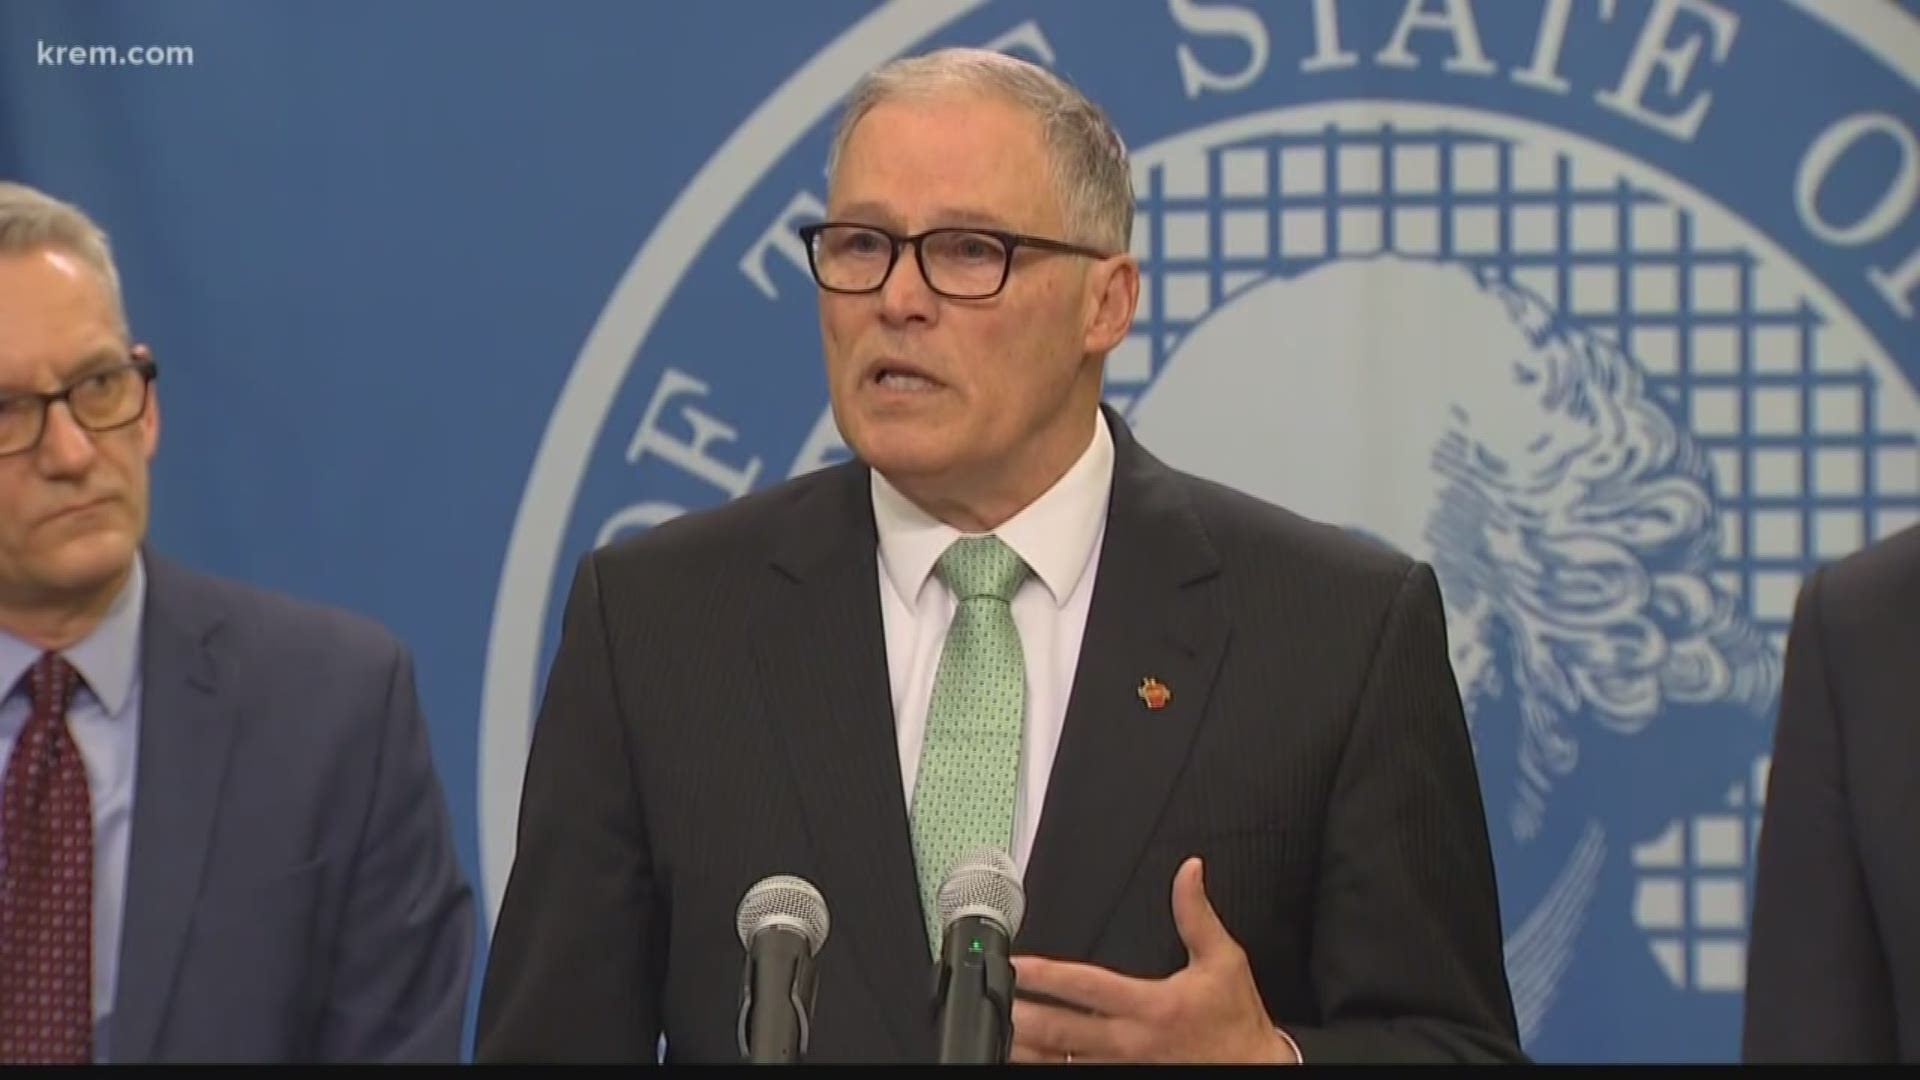 In an interview with KREM, Inslee said he plans to ask Vice President Pence for more federal action to further increase coronavirus testing capacity.